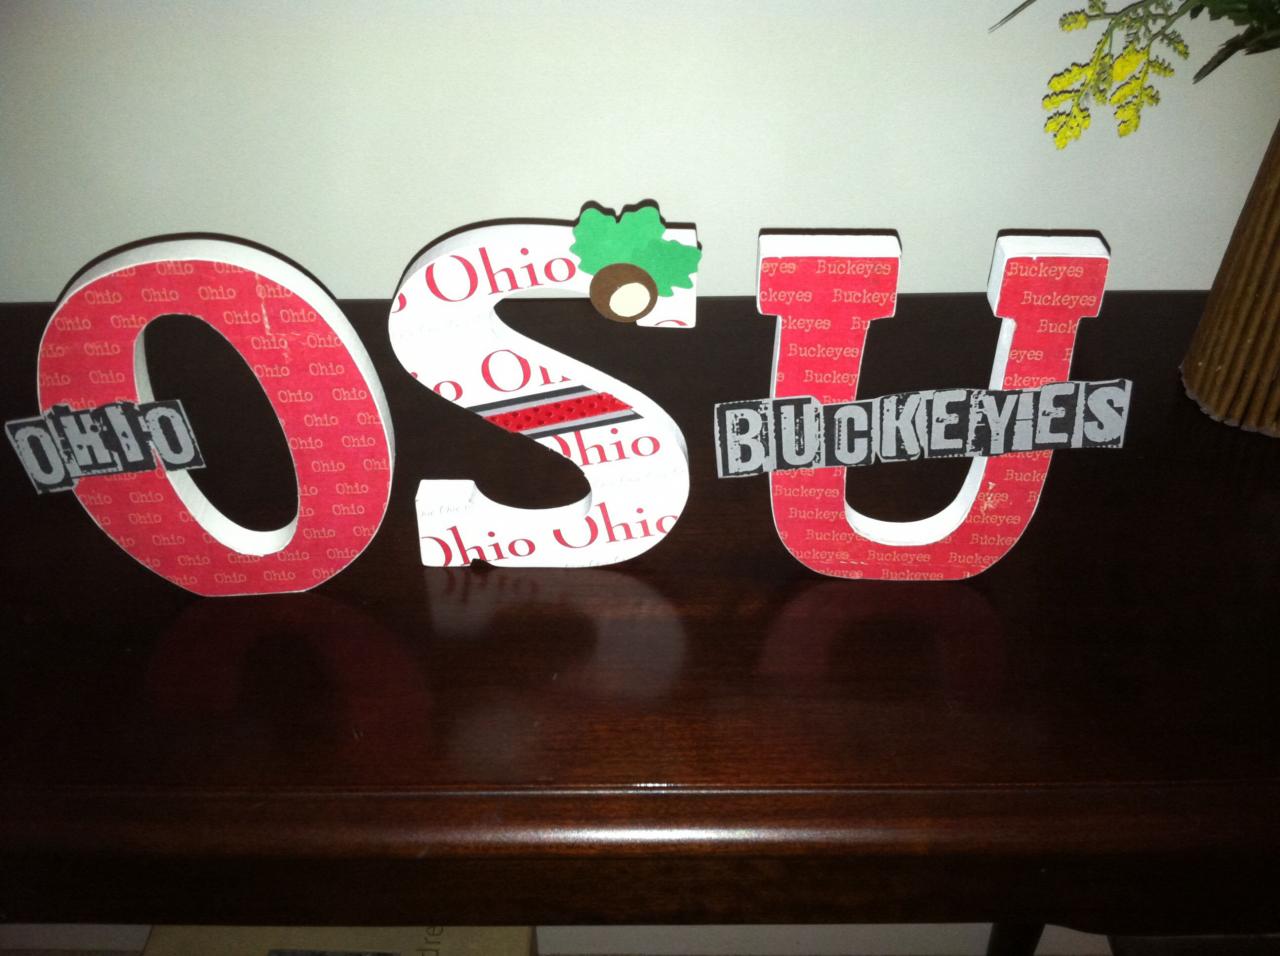 Made these for my Ohio State bathroom! Ohio state decor, How firm thy